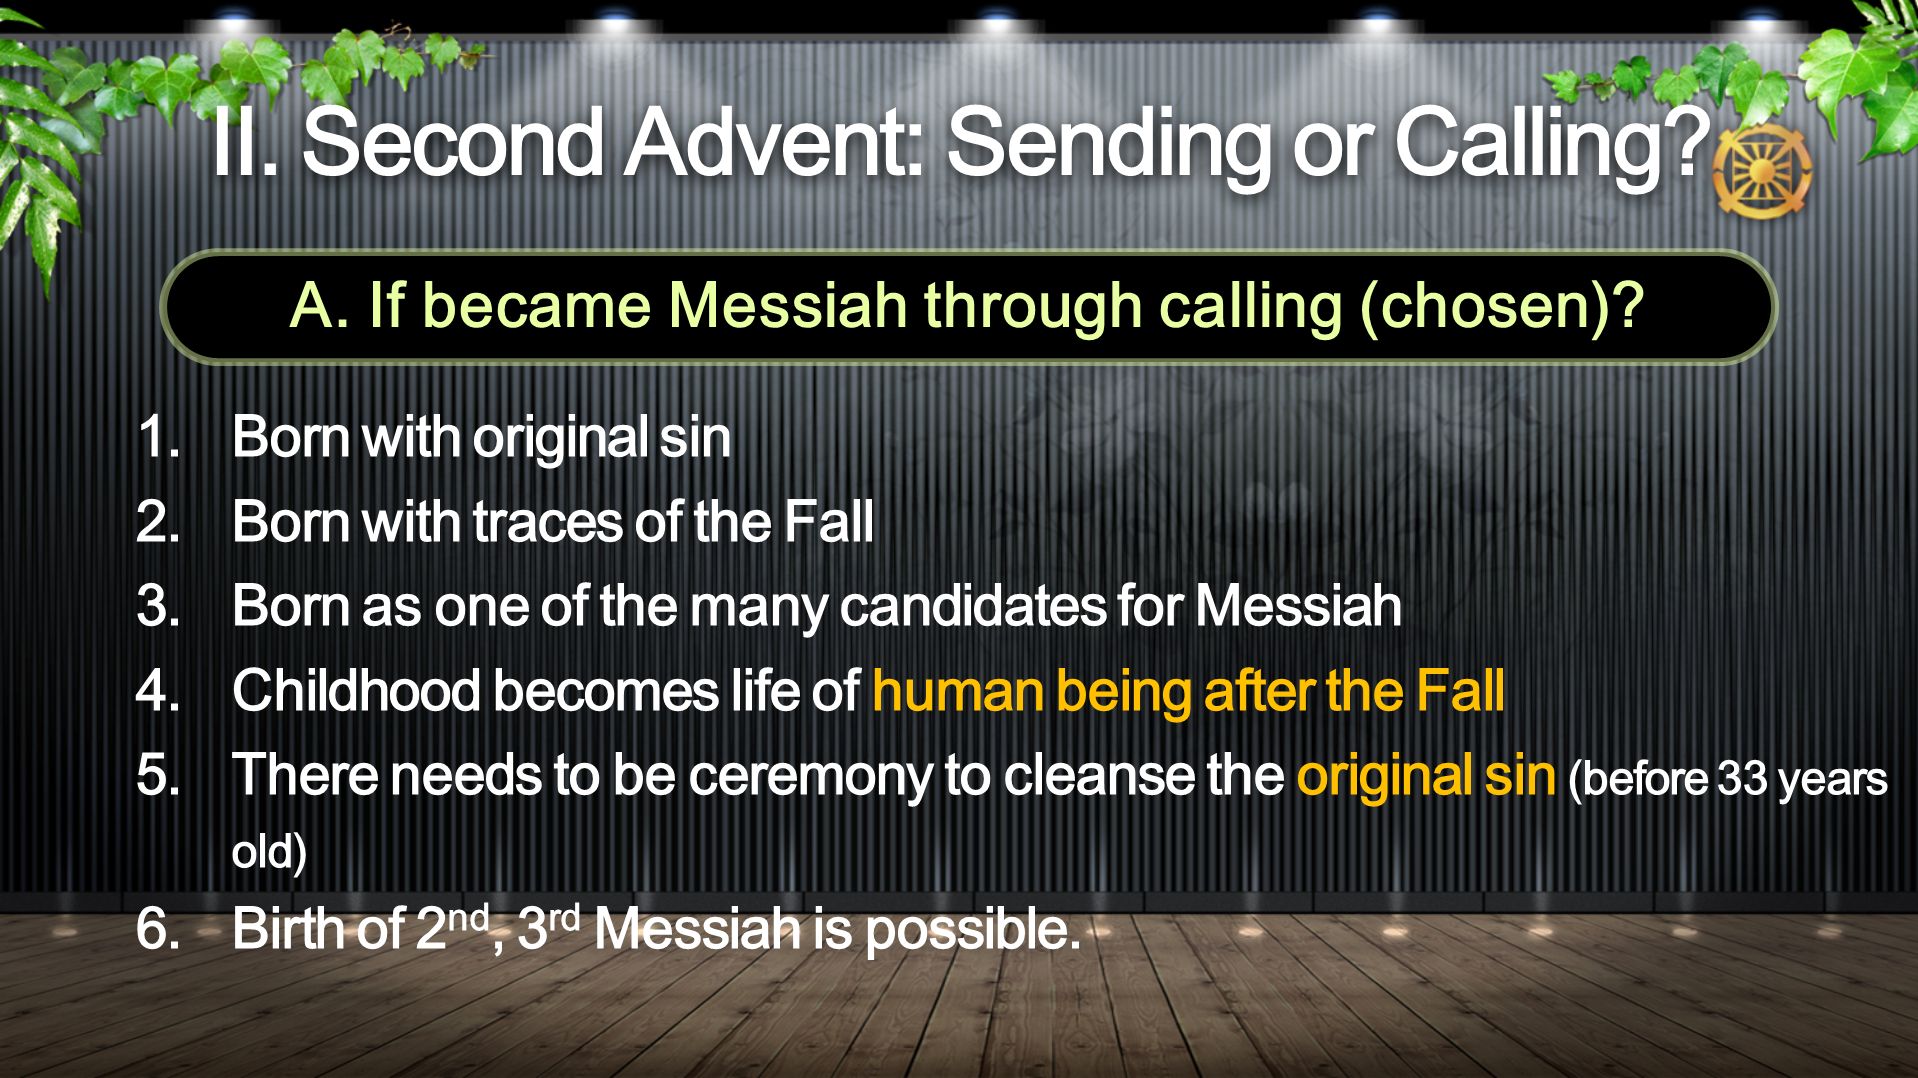 II. Second Advent: Sending or Calling.